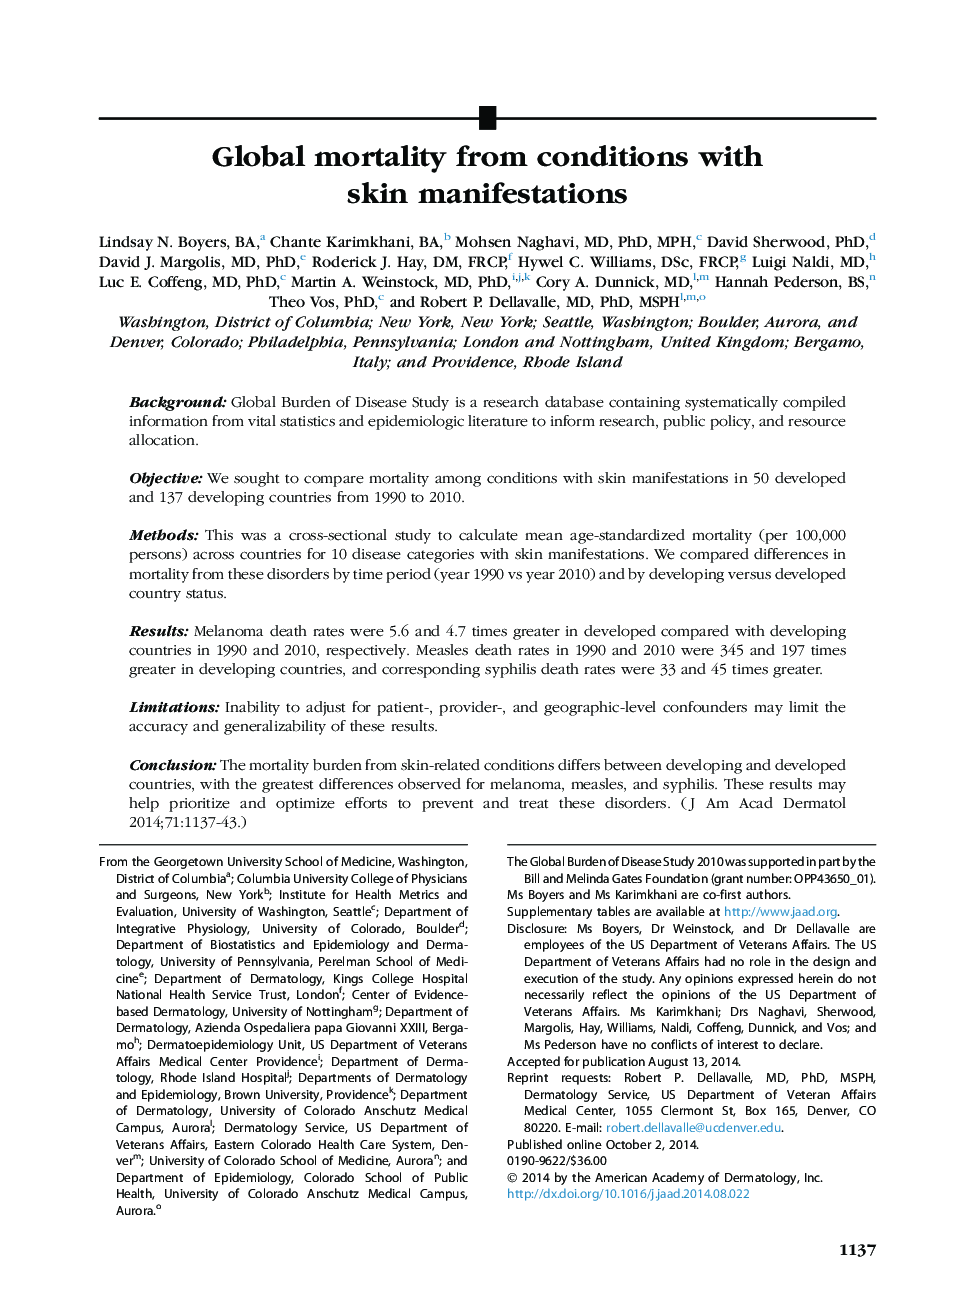 Original articleGlobal mortality from conditions with skin manifestations